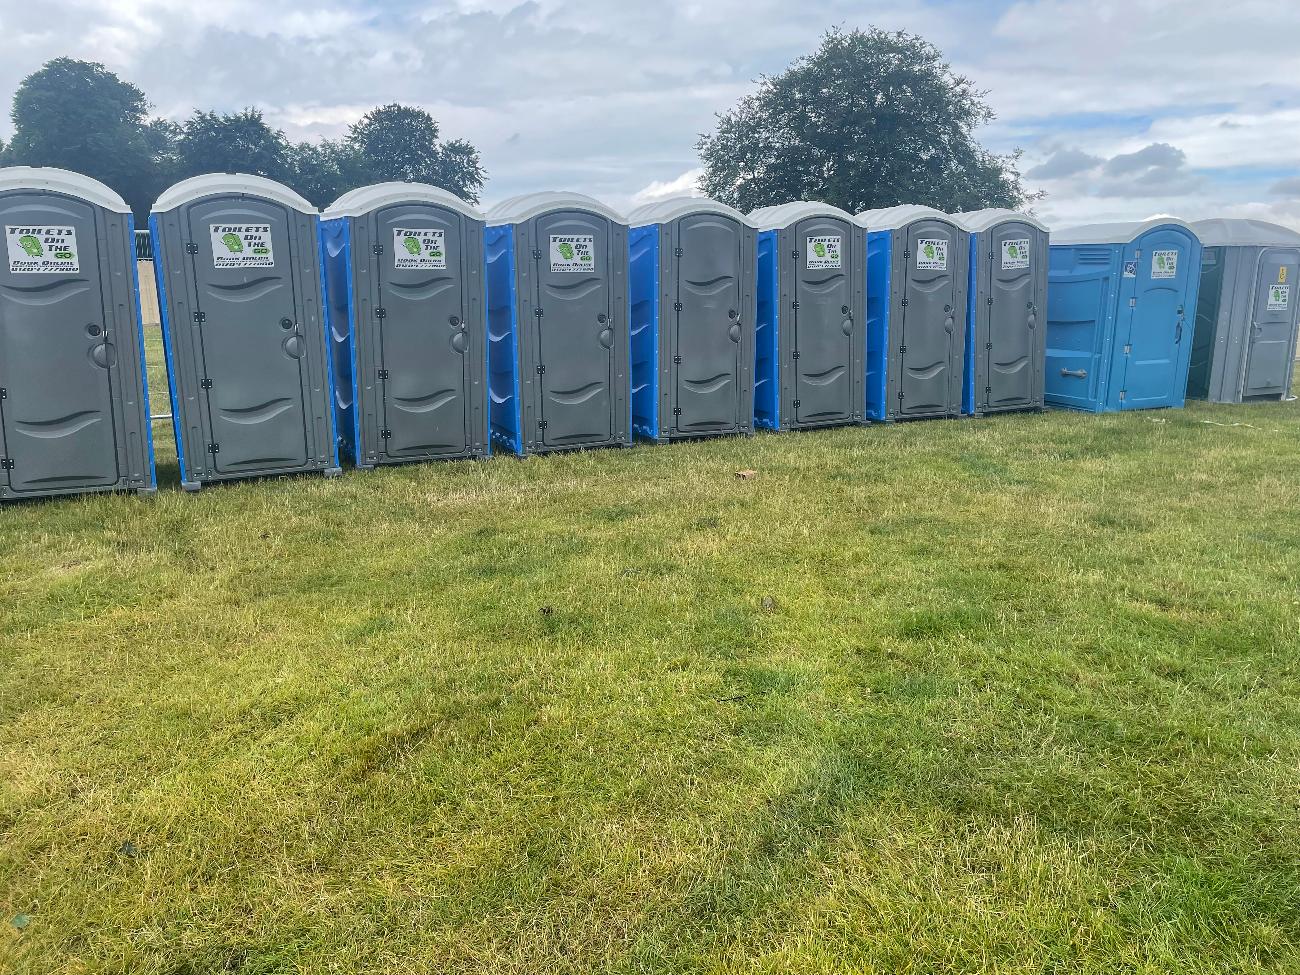 Gallery | Portable Toilet Loo Hire Rental Company in North West uk and Manchester gallery image 16